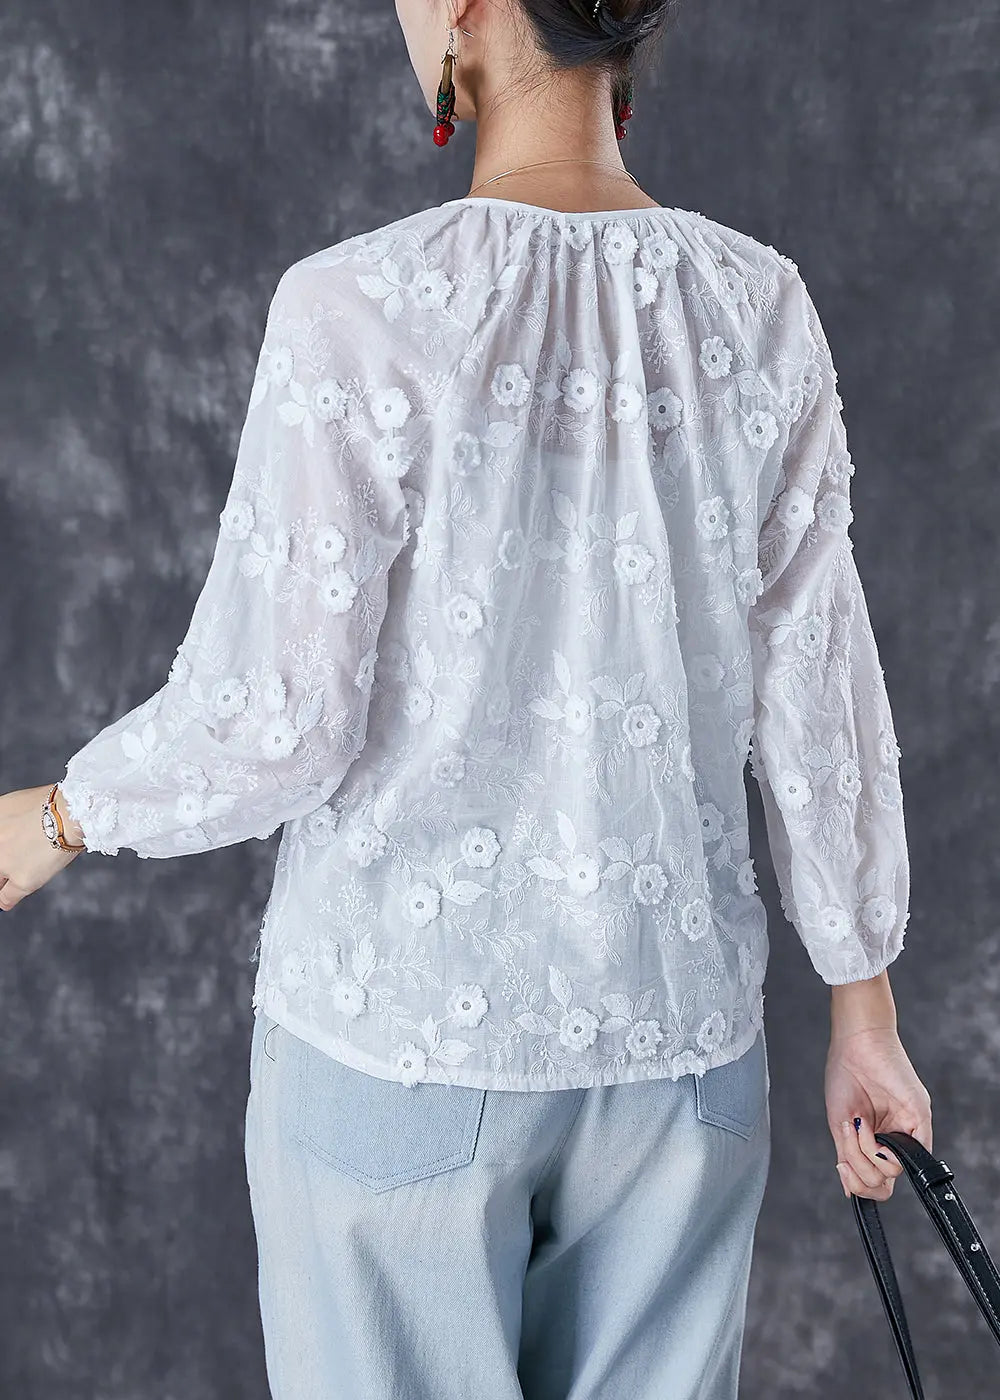 Elegant White Embroideried Floral Lace Up Cotton Tops Fall Ada Fashion